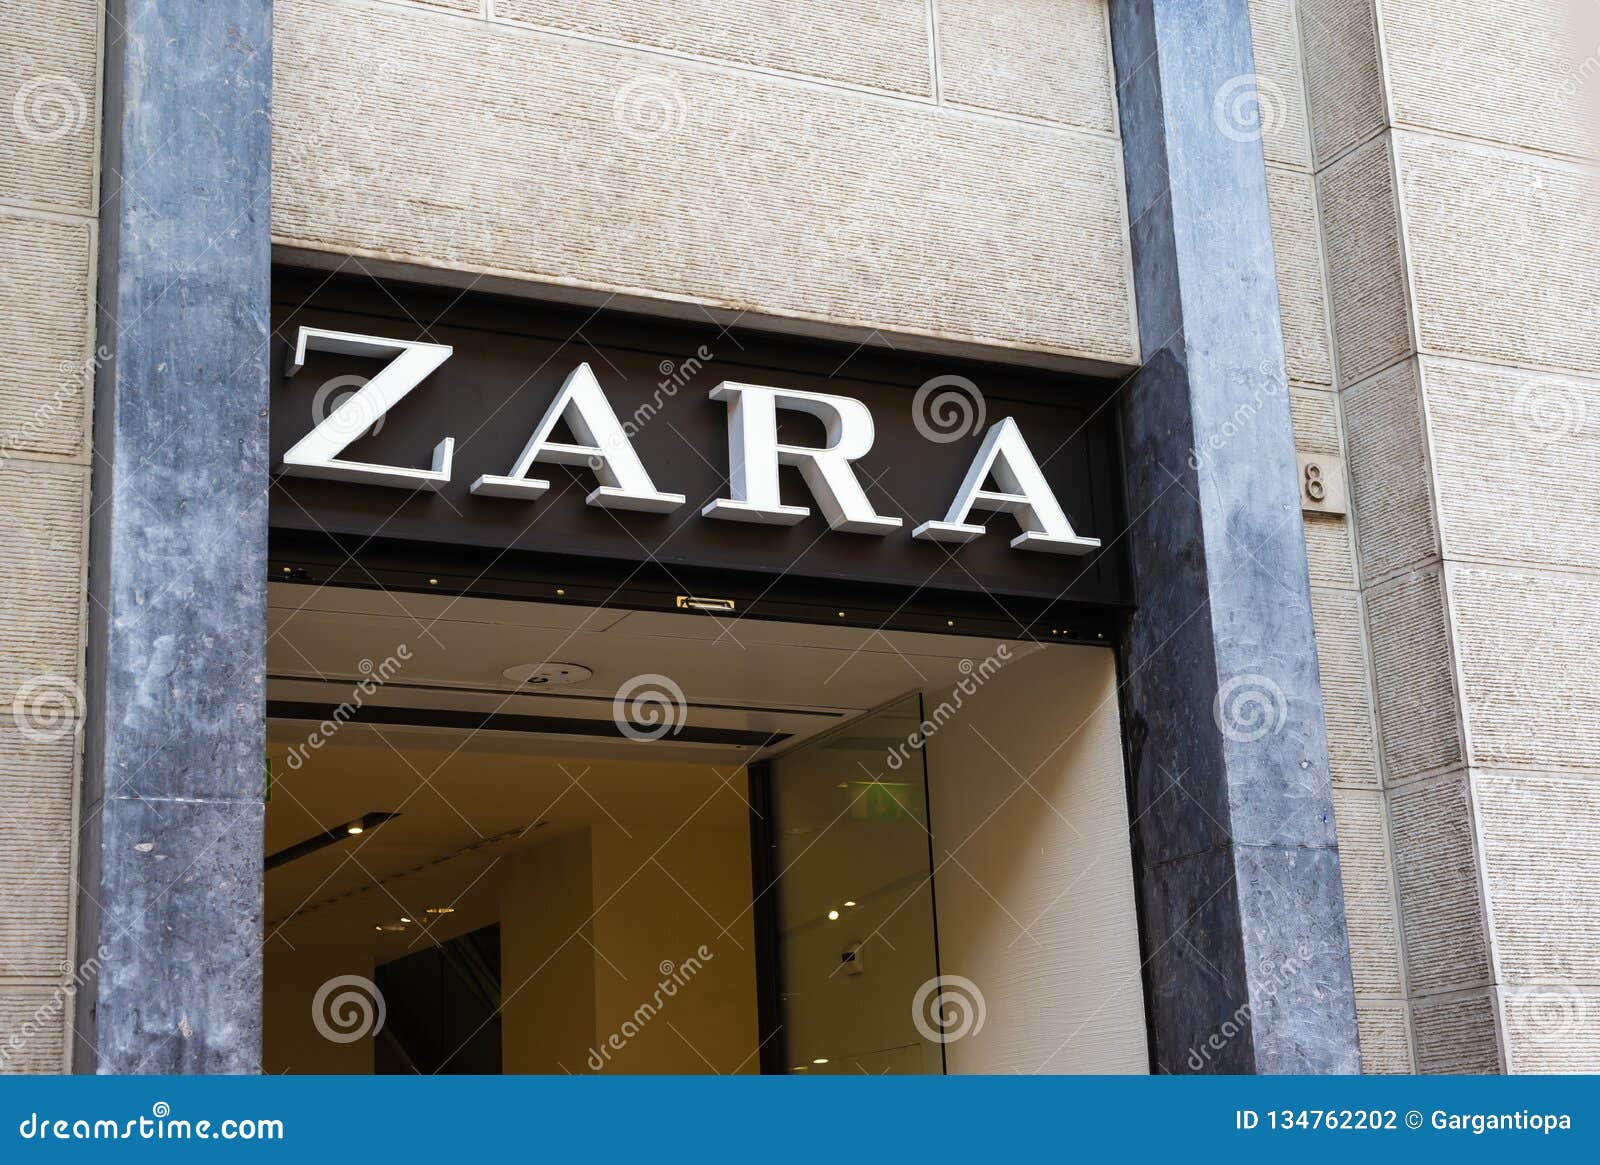 Zara Shop on Via Mazzini. it is Spanish Clothing and Accessories ...